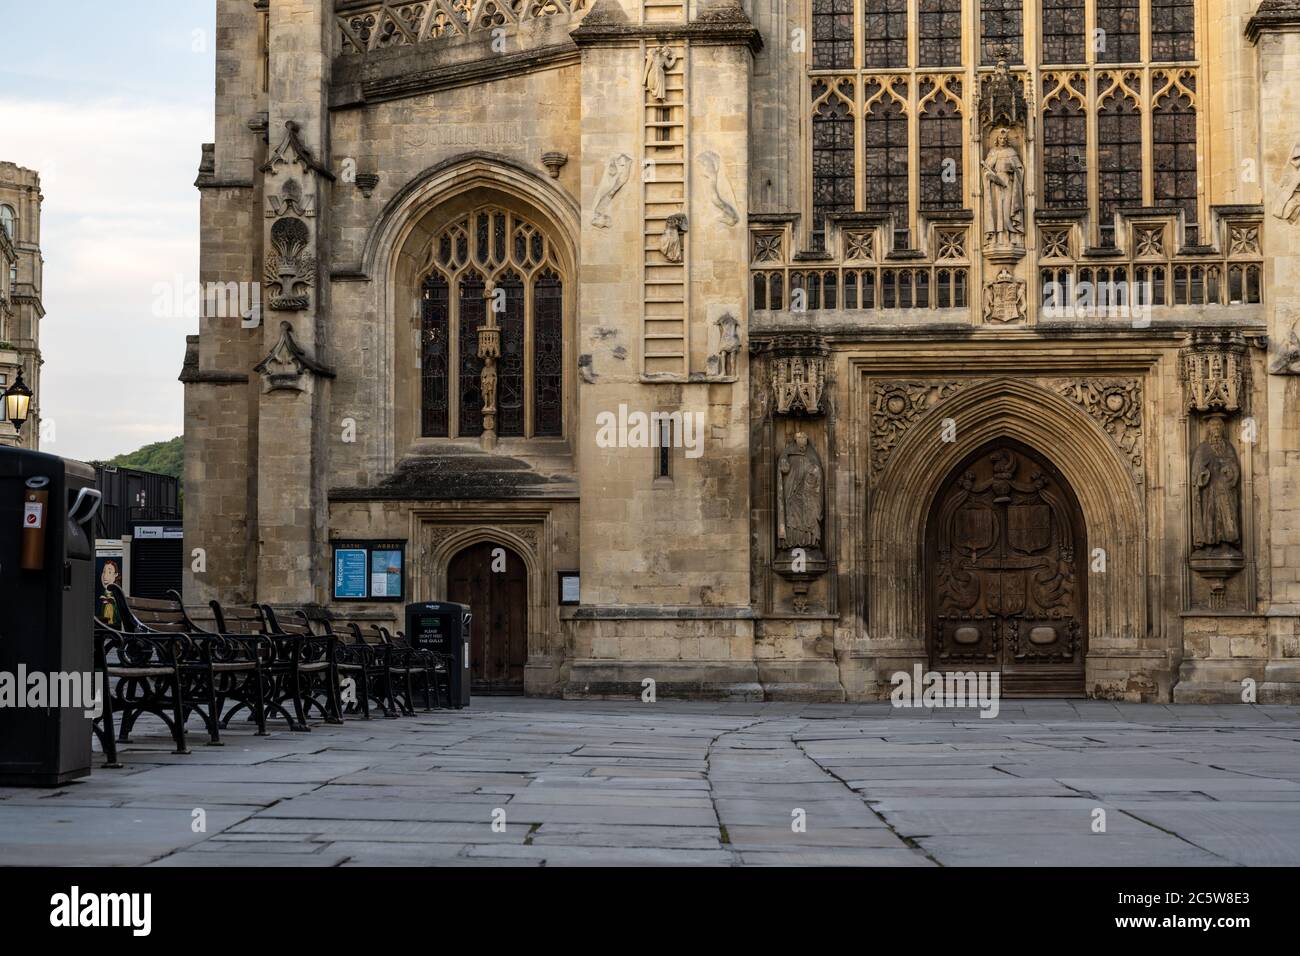 Bath's Abbey Church Yard is unusually empty of people during the Covid-19 pandemic travel restrictions. Stock Photo